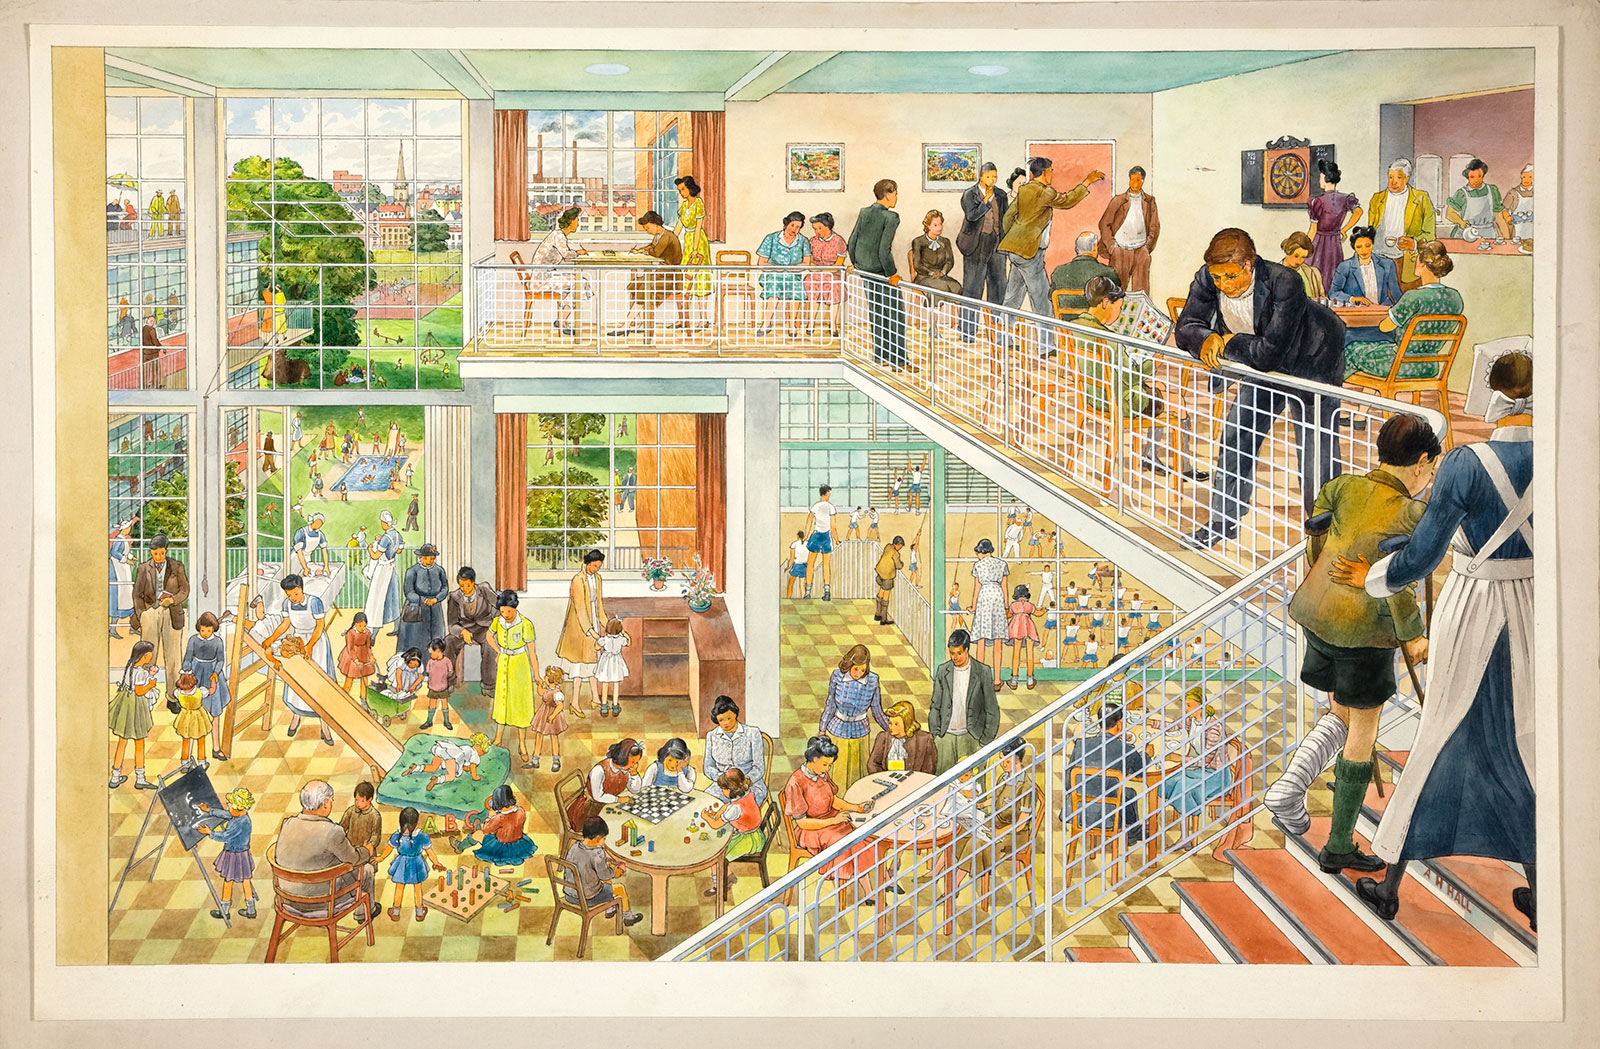 Illustration of a community centre with people doing various activities including playing games, exercising, and drinking tea.